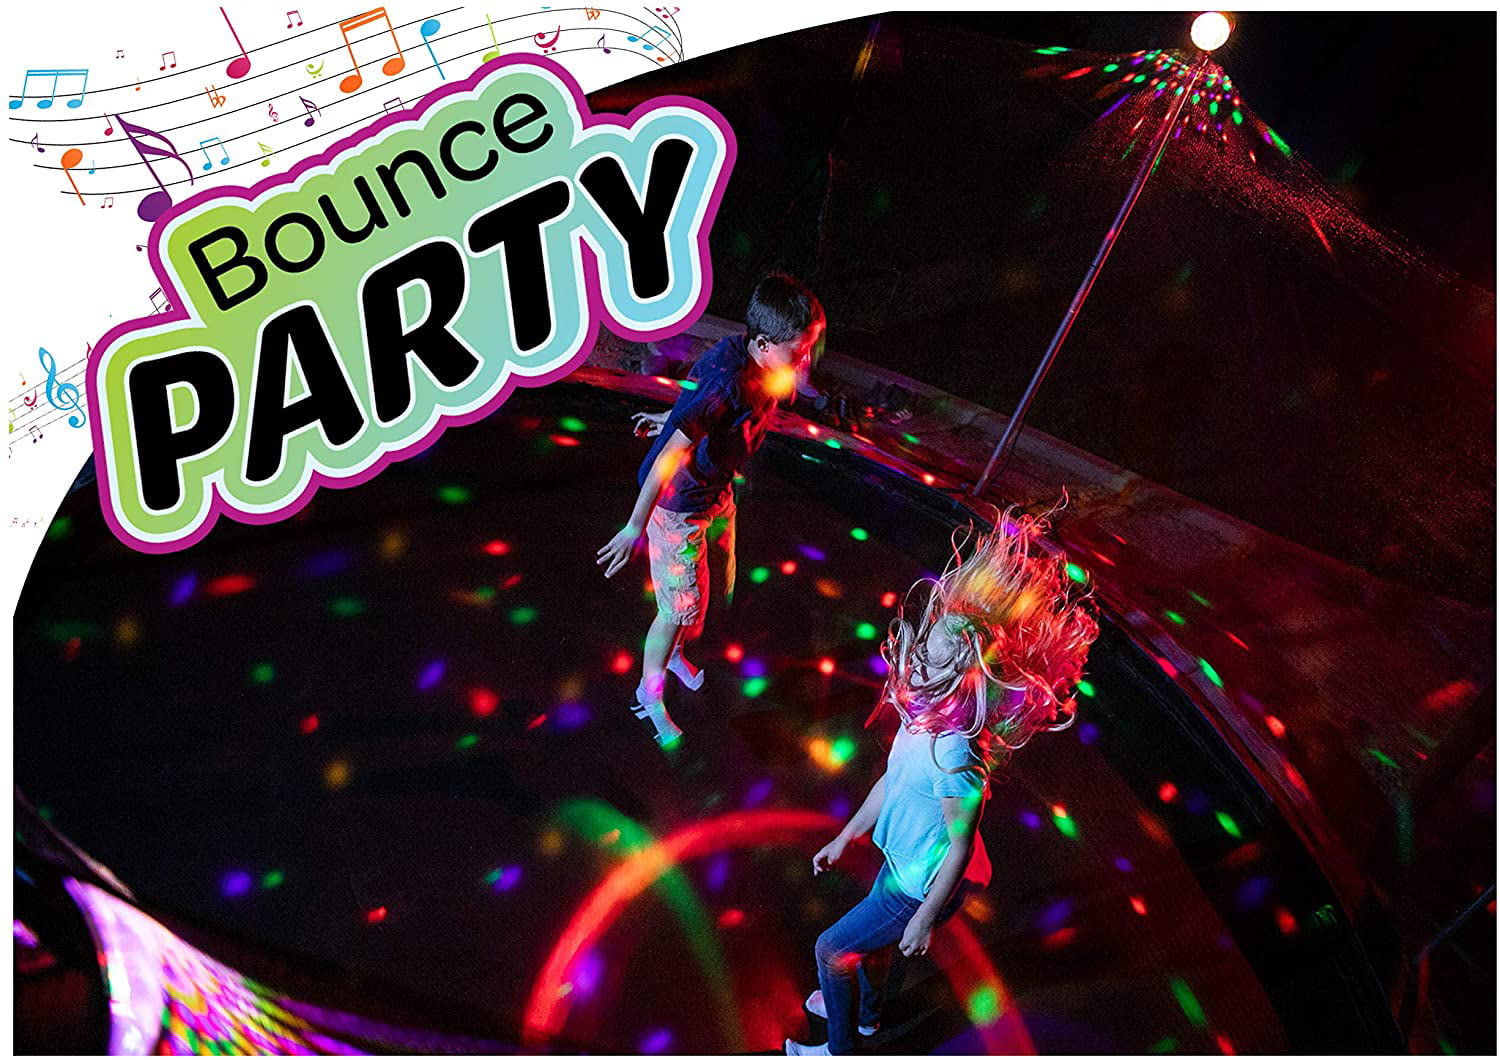 ThrillZoo Bounce Party - Trampoline Lights &amp; Music - Kids Fun Summer Nightime Trampoline Accessories Game